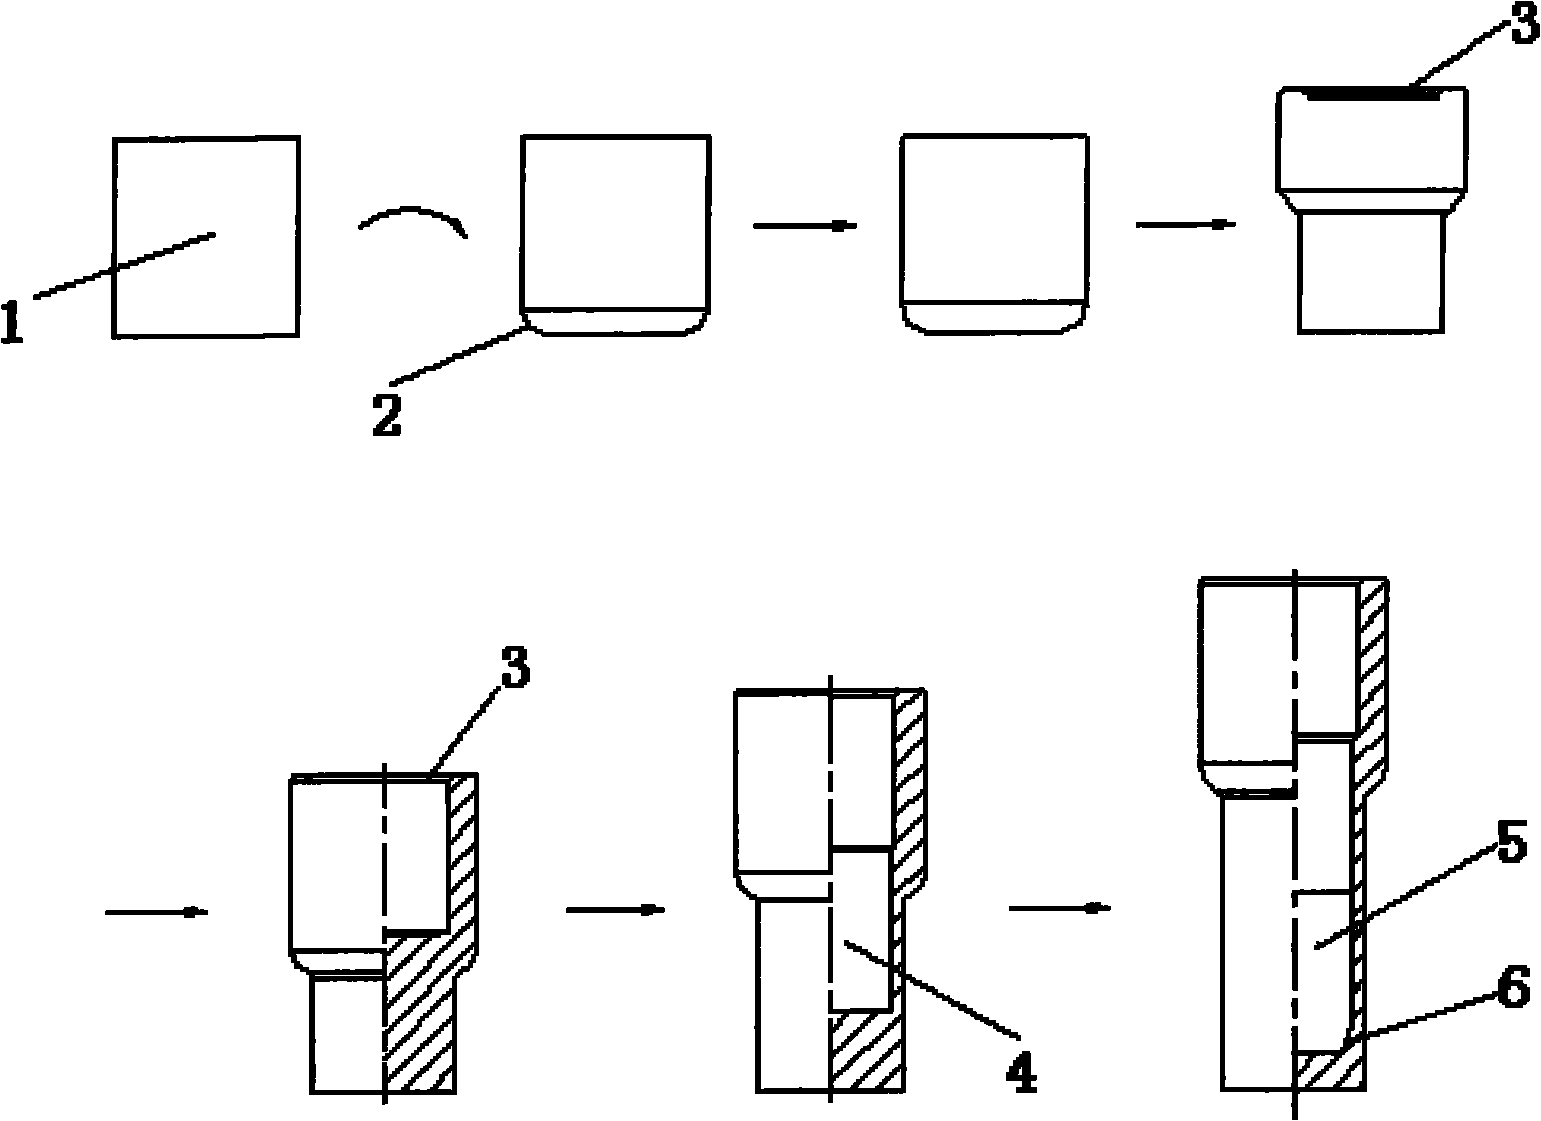 Process for manufacturing outer sleeve blanks